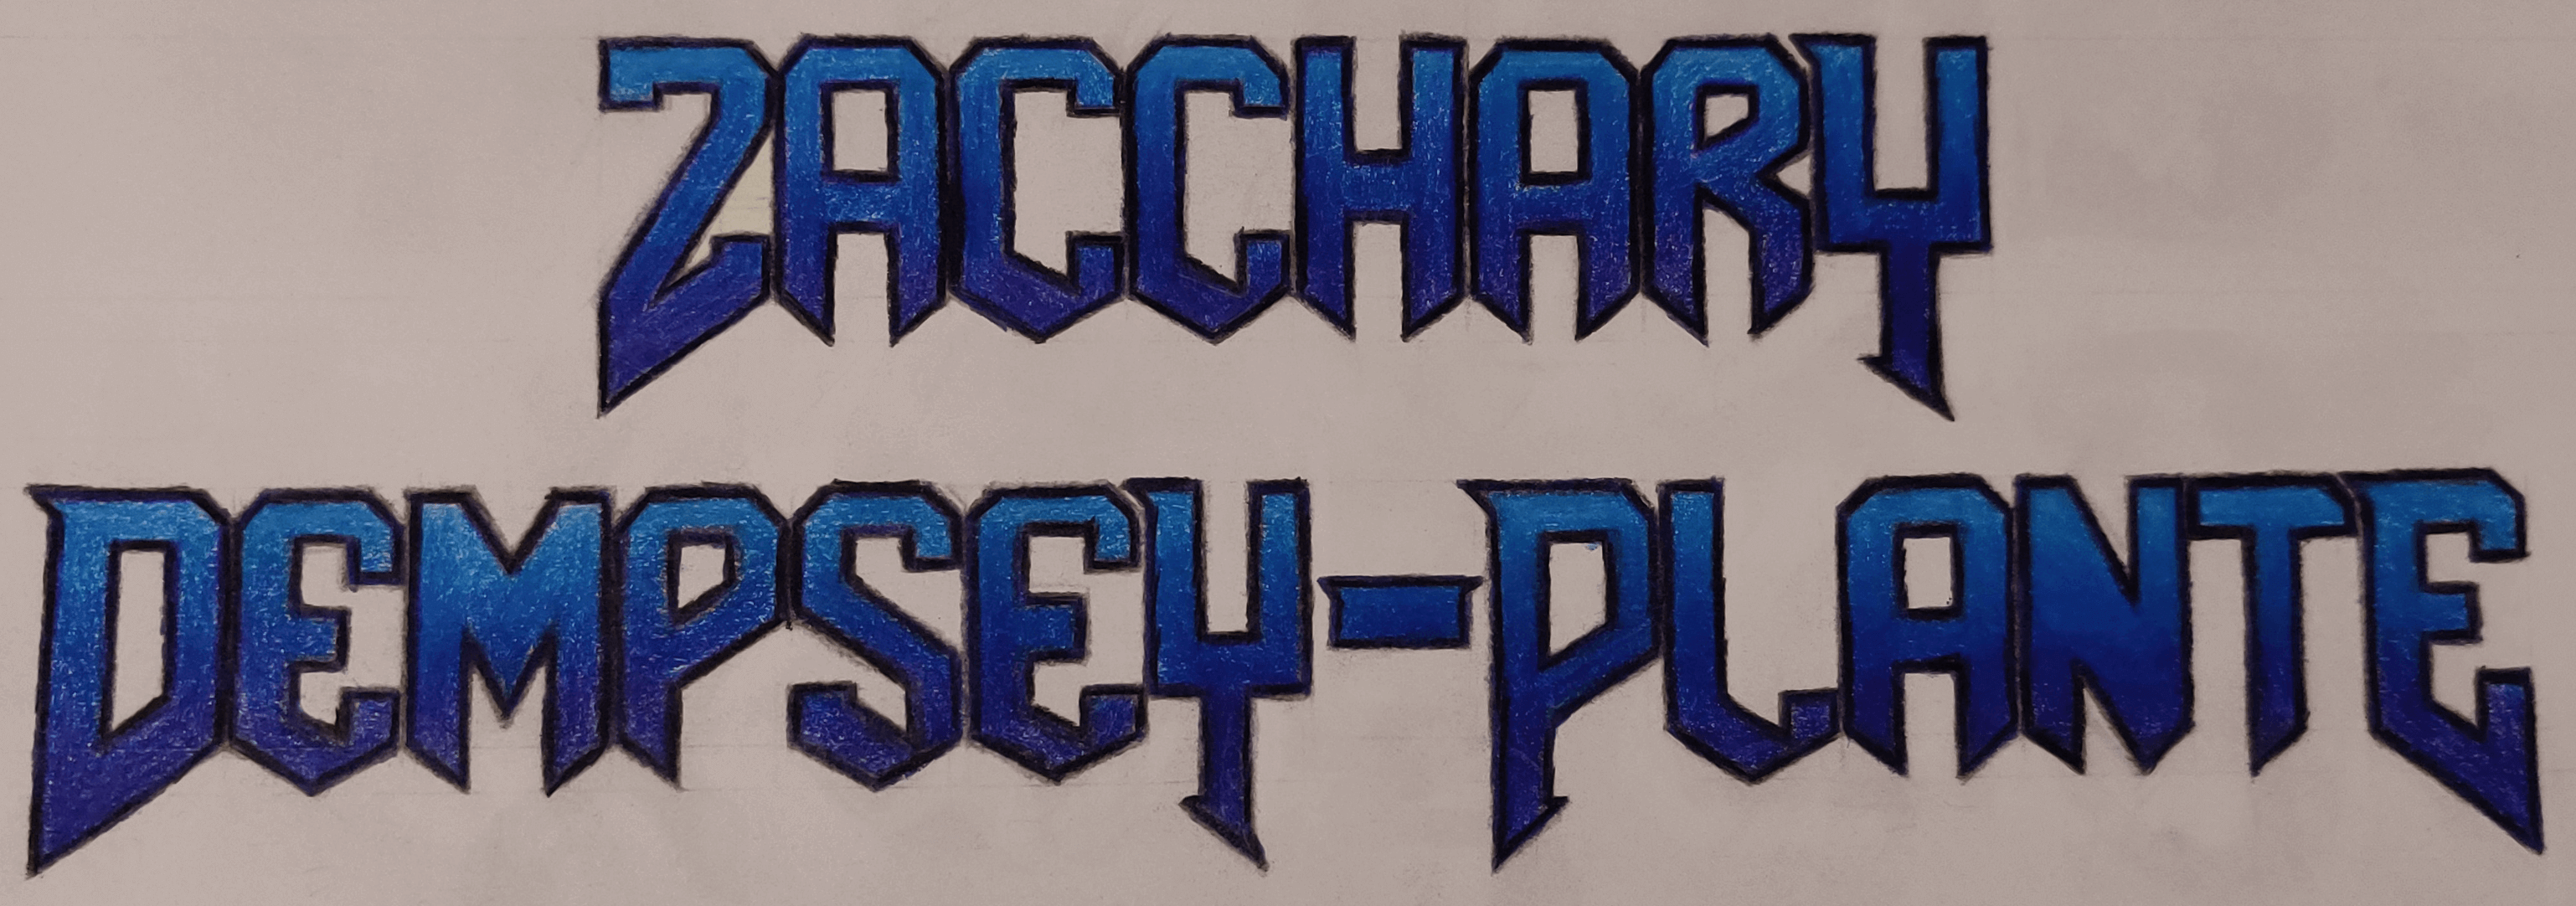 A typography drawing of my name in DOOM-styled font with a blue-to-purple (top-to-bottom) gradient.